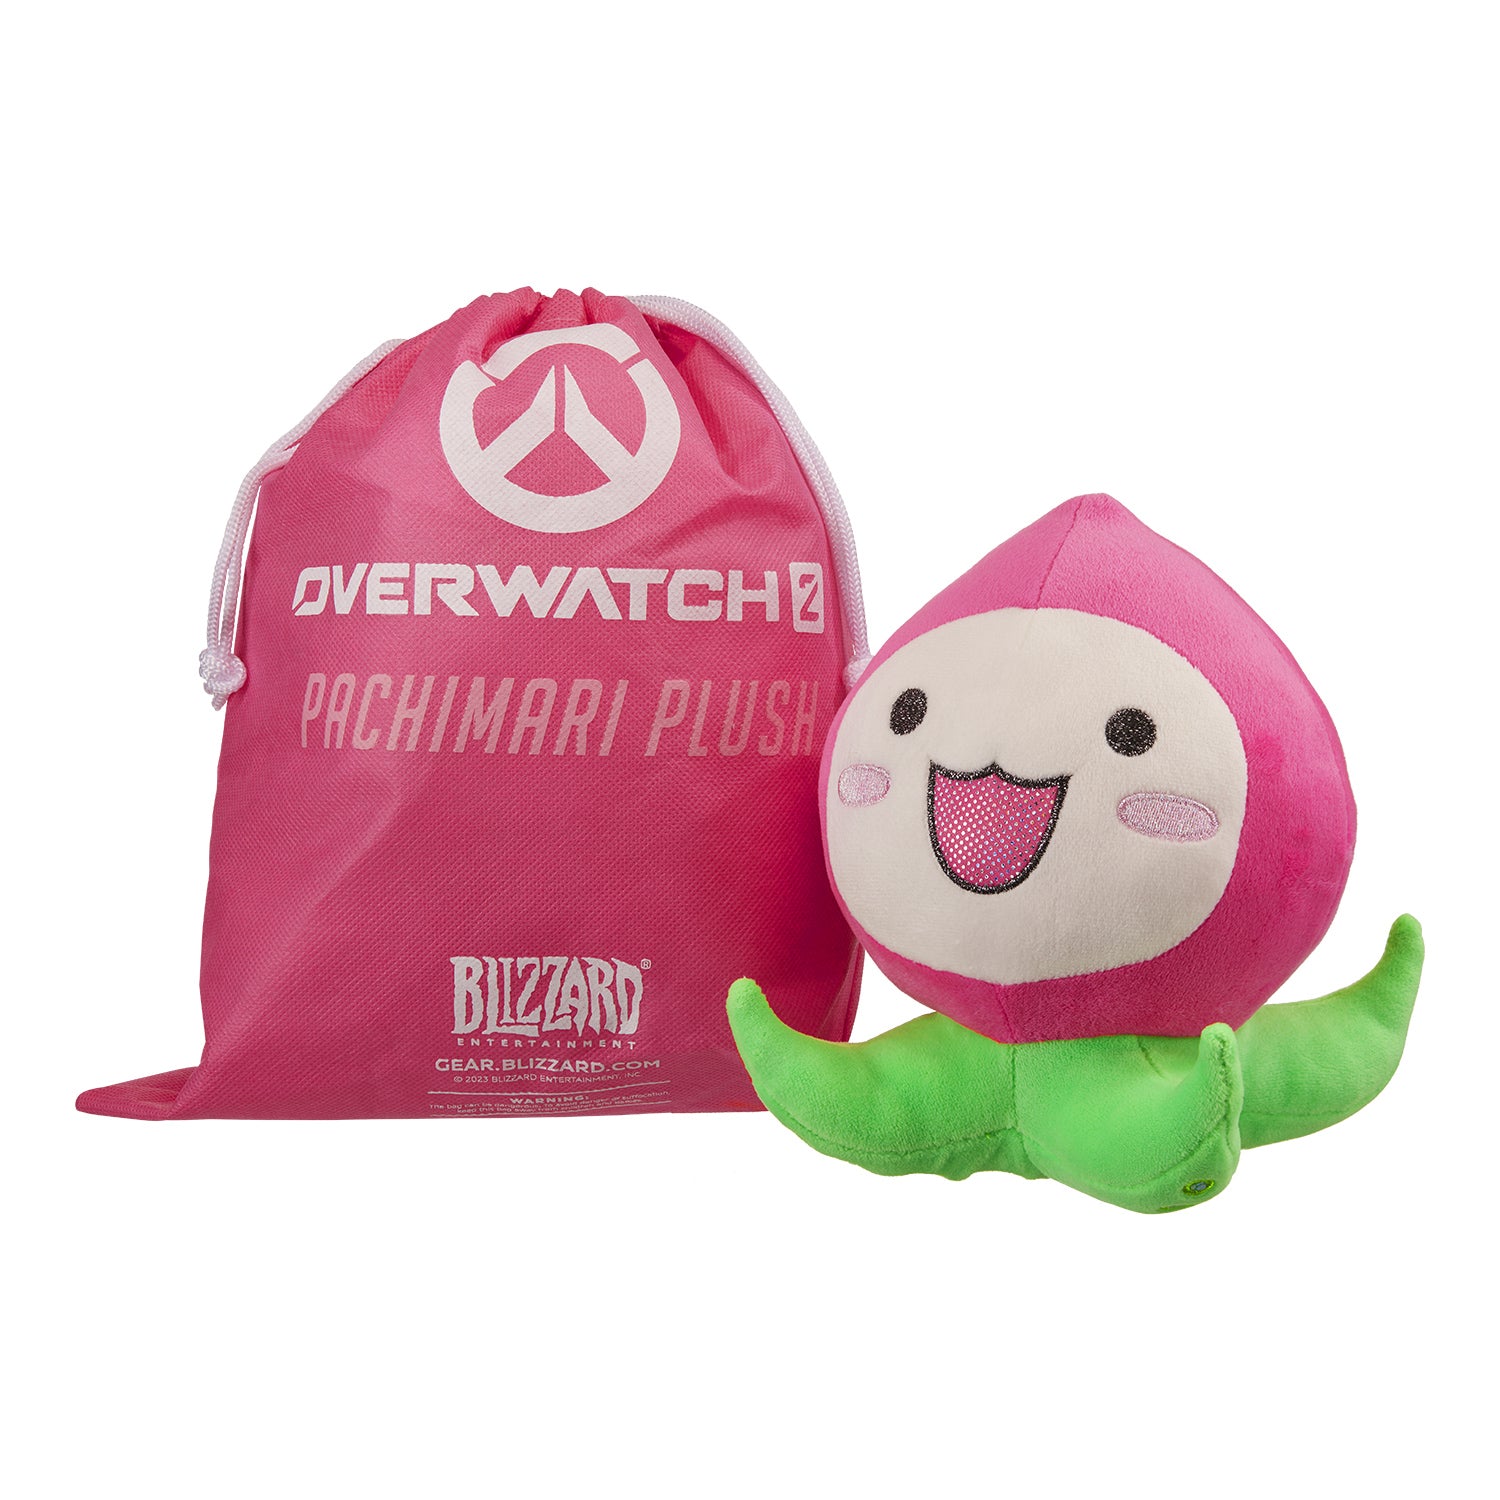 Overwatch 2 Pachimari Plush Convention Variant - Front View with Bag